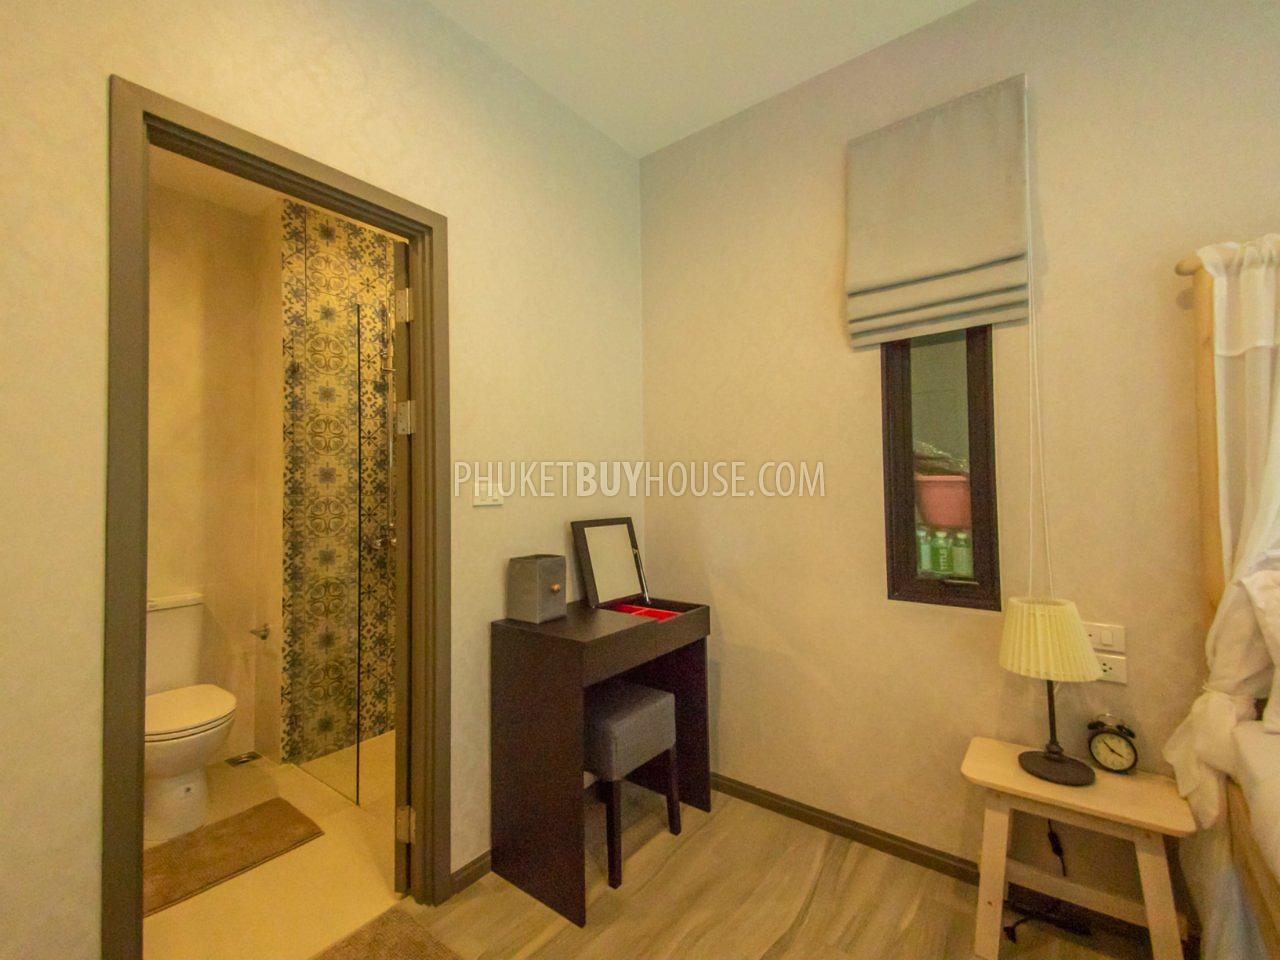 NAY6197: 1 Bedroom Apartment in a New Project within Walking Distance to Nai Yang Beach. Photo #1